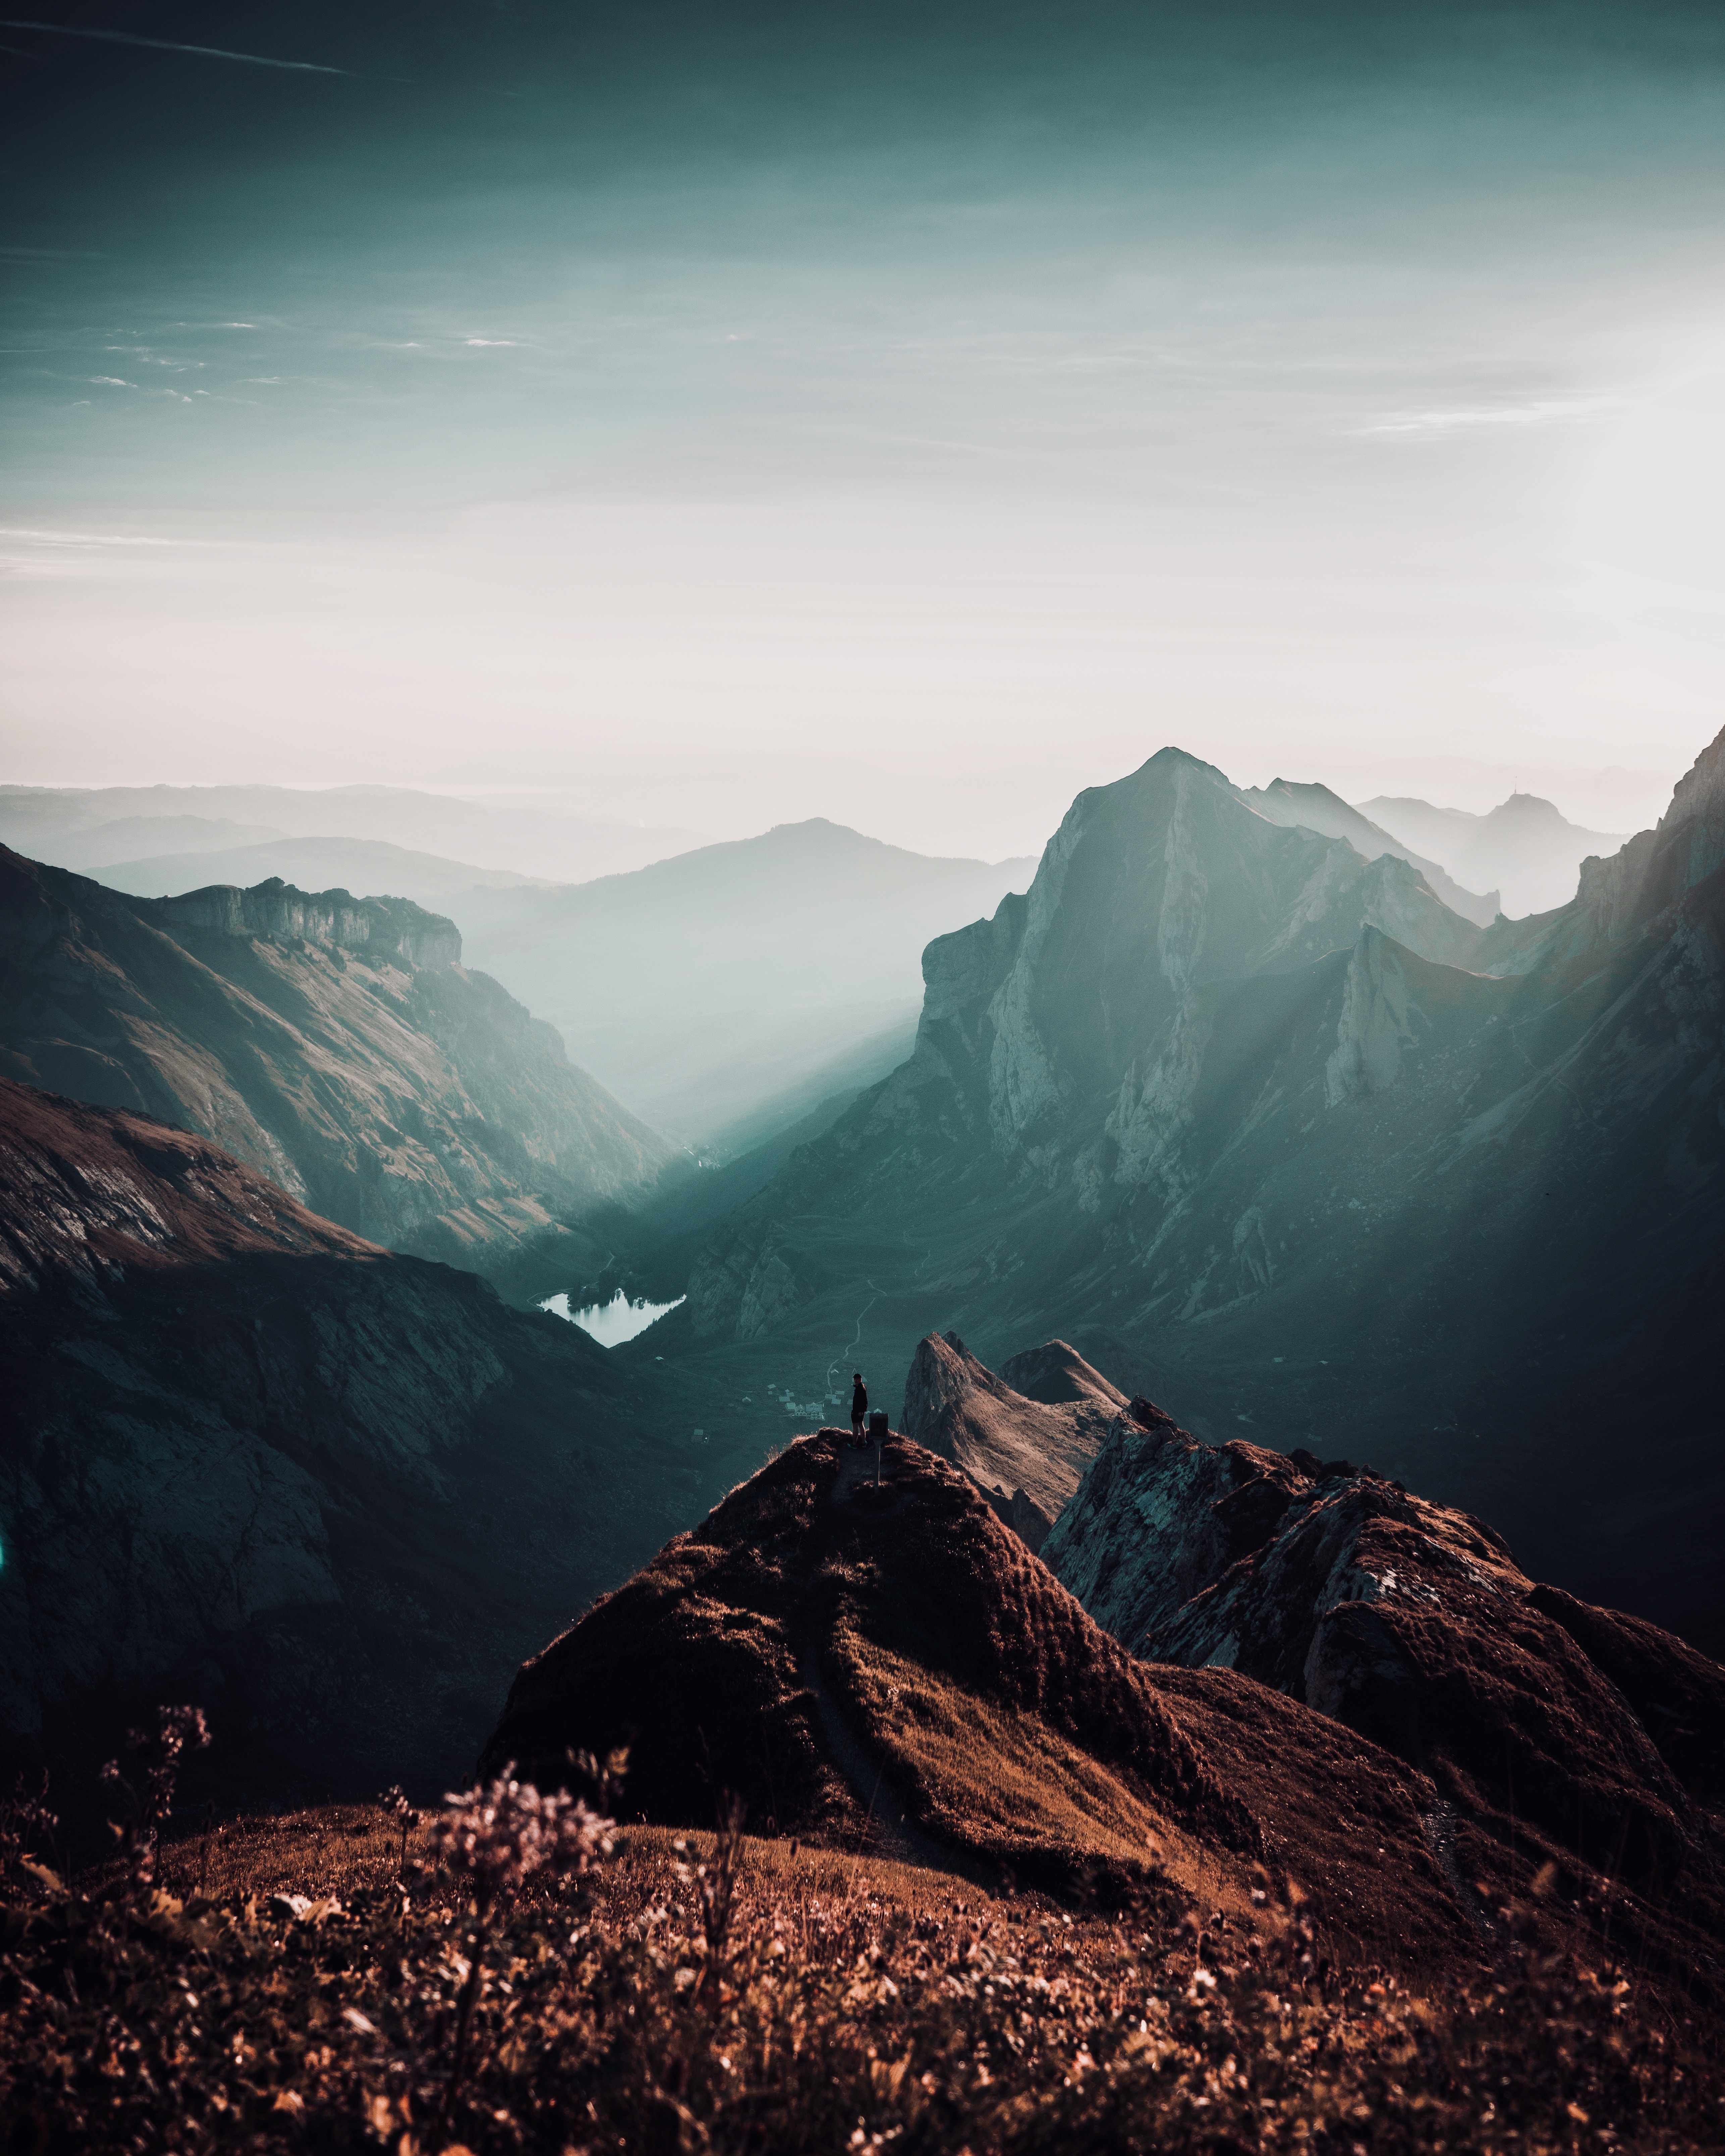 tops, loneliness, nature, privacy, mountains, vertex, seclusion, switzerland Full HD